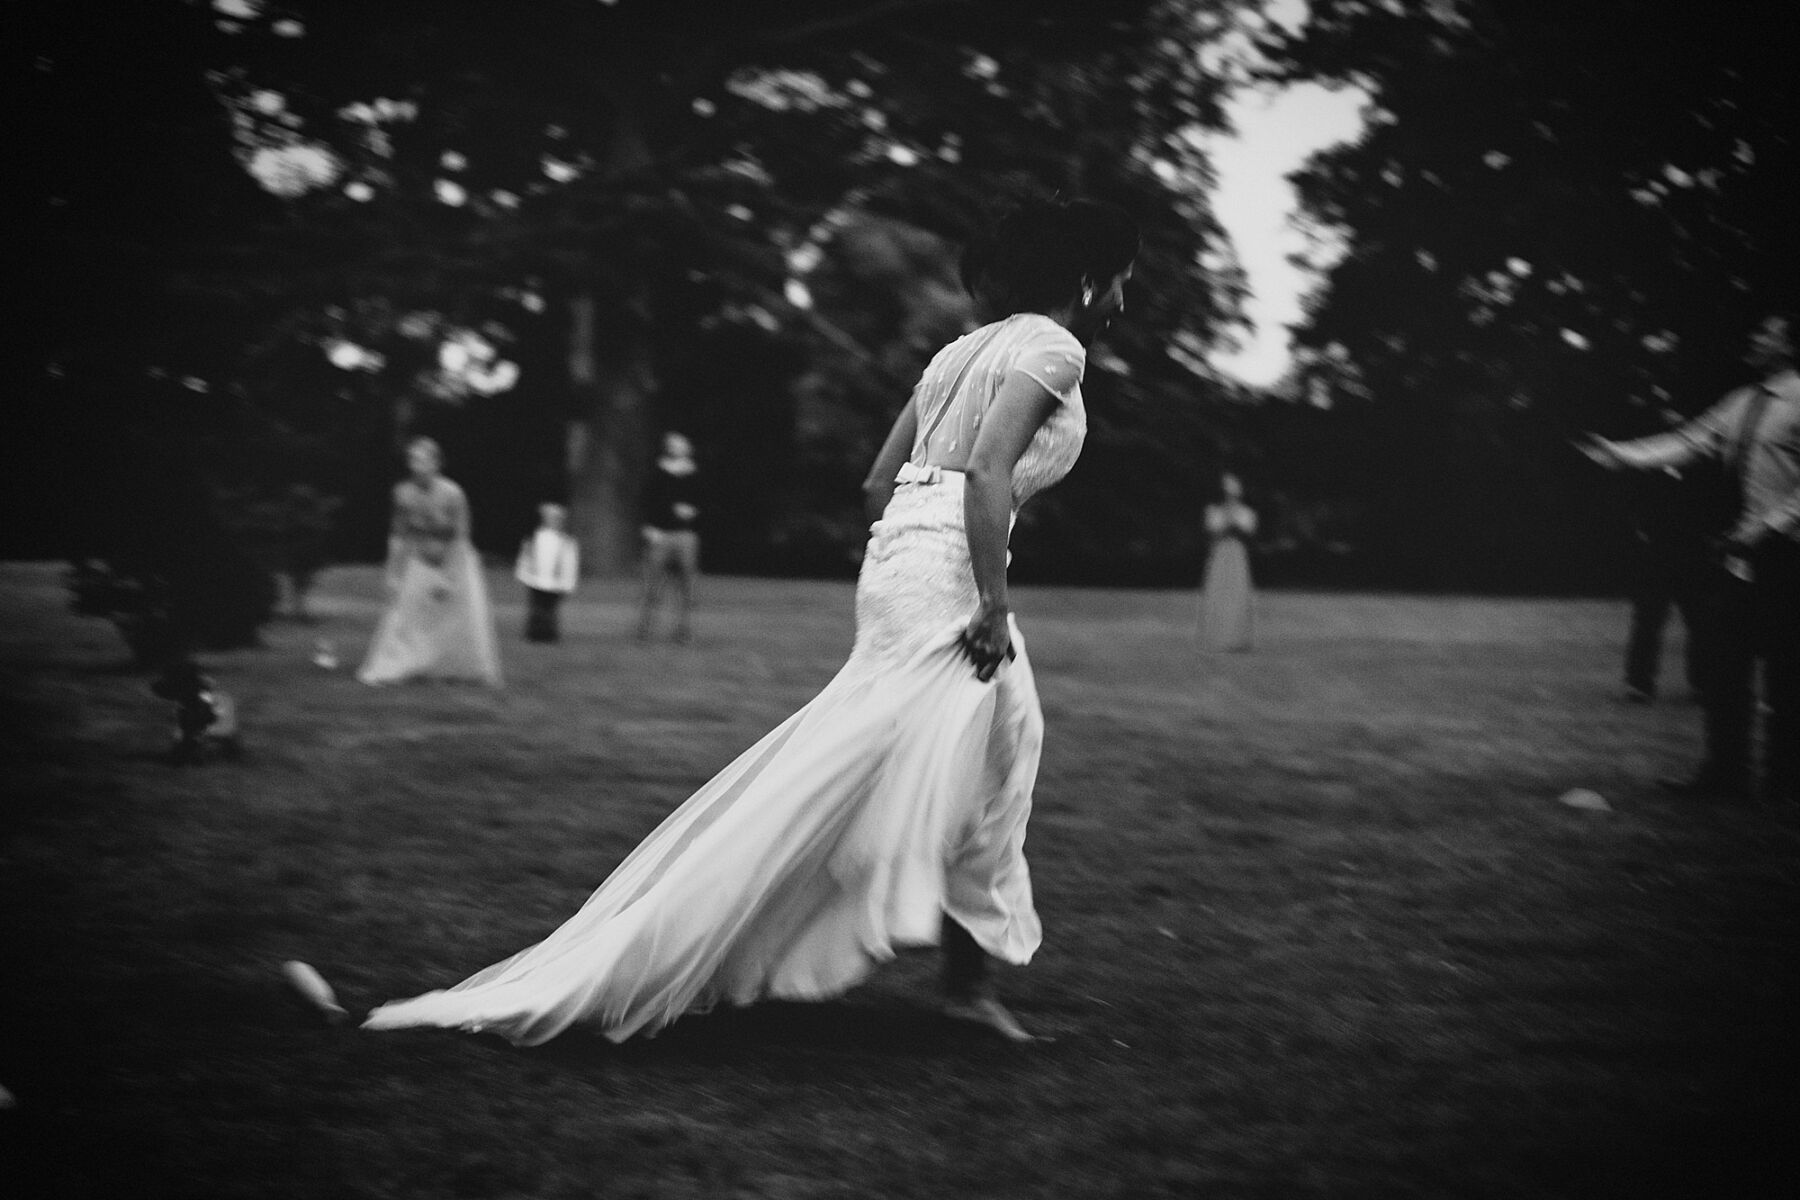 Blurred black and white images capturing bride running across a field, by Claudia Rose Carter Photography.